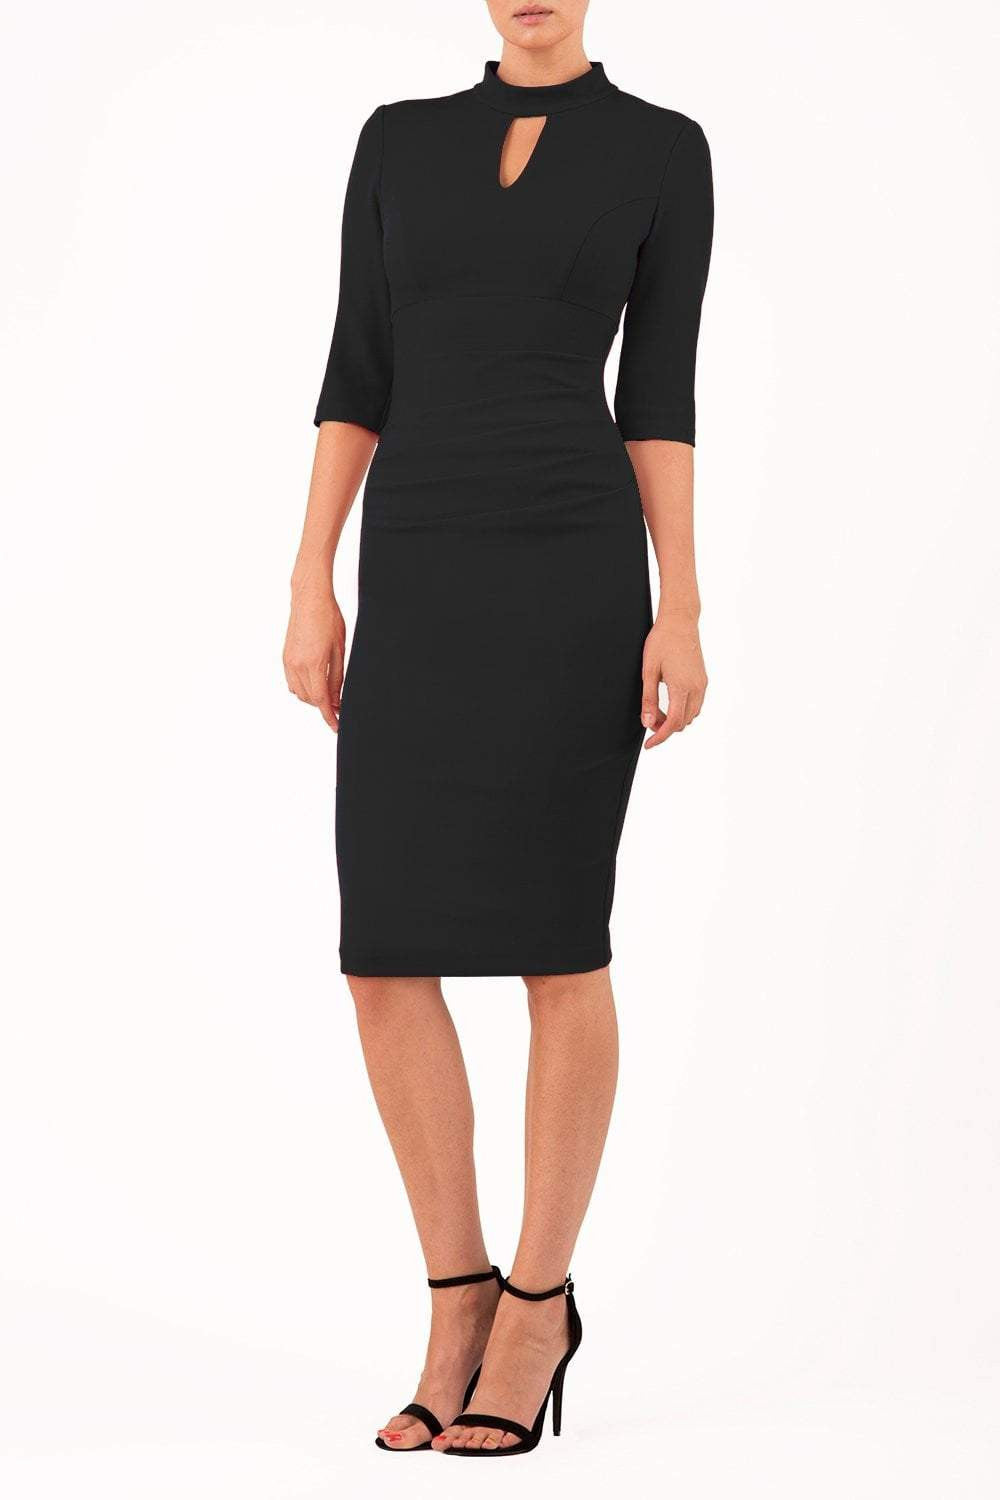 model is wearing diva catwalk pinhoe pencil dress with sleeved and high neckline with a keyhole detail in the middle and pleating across the tummy area in black front